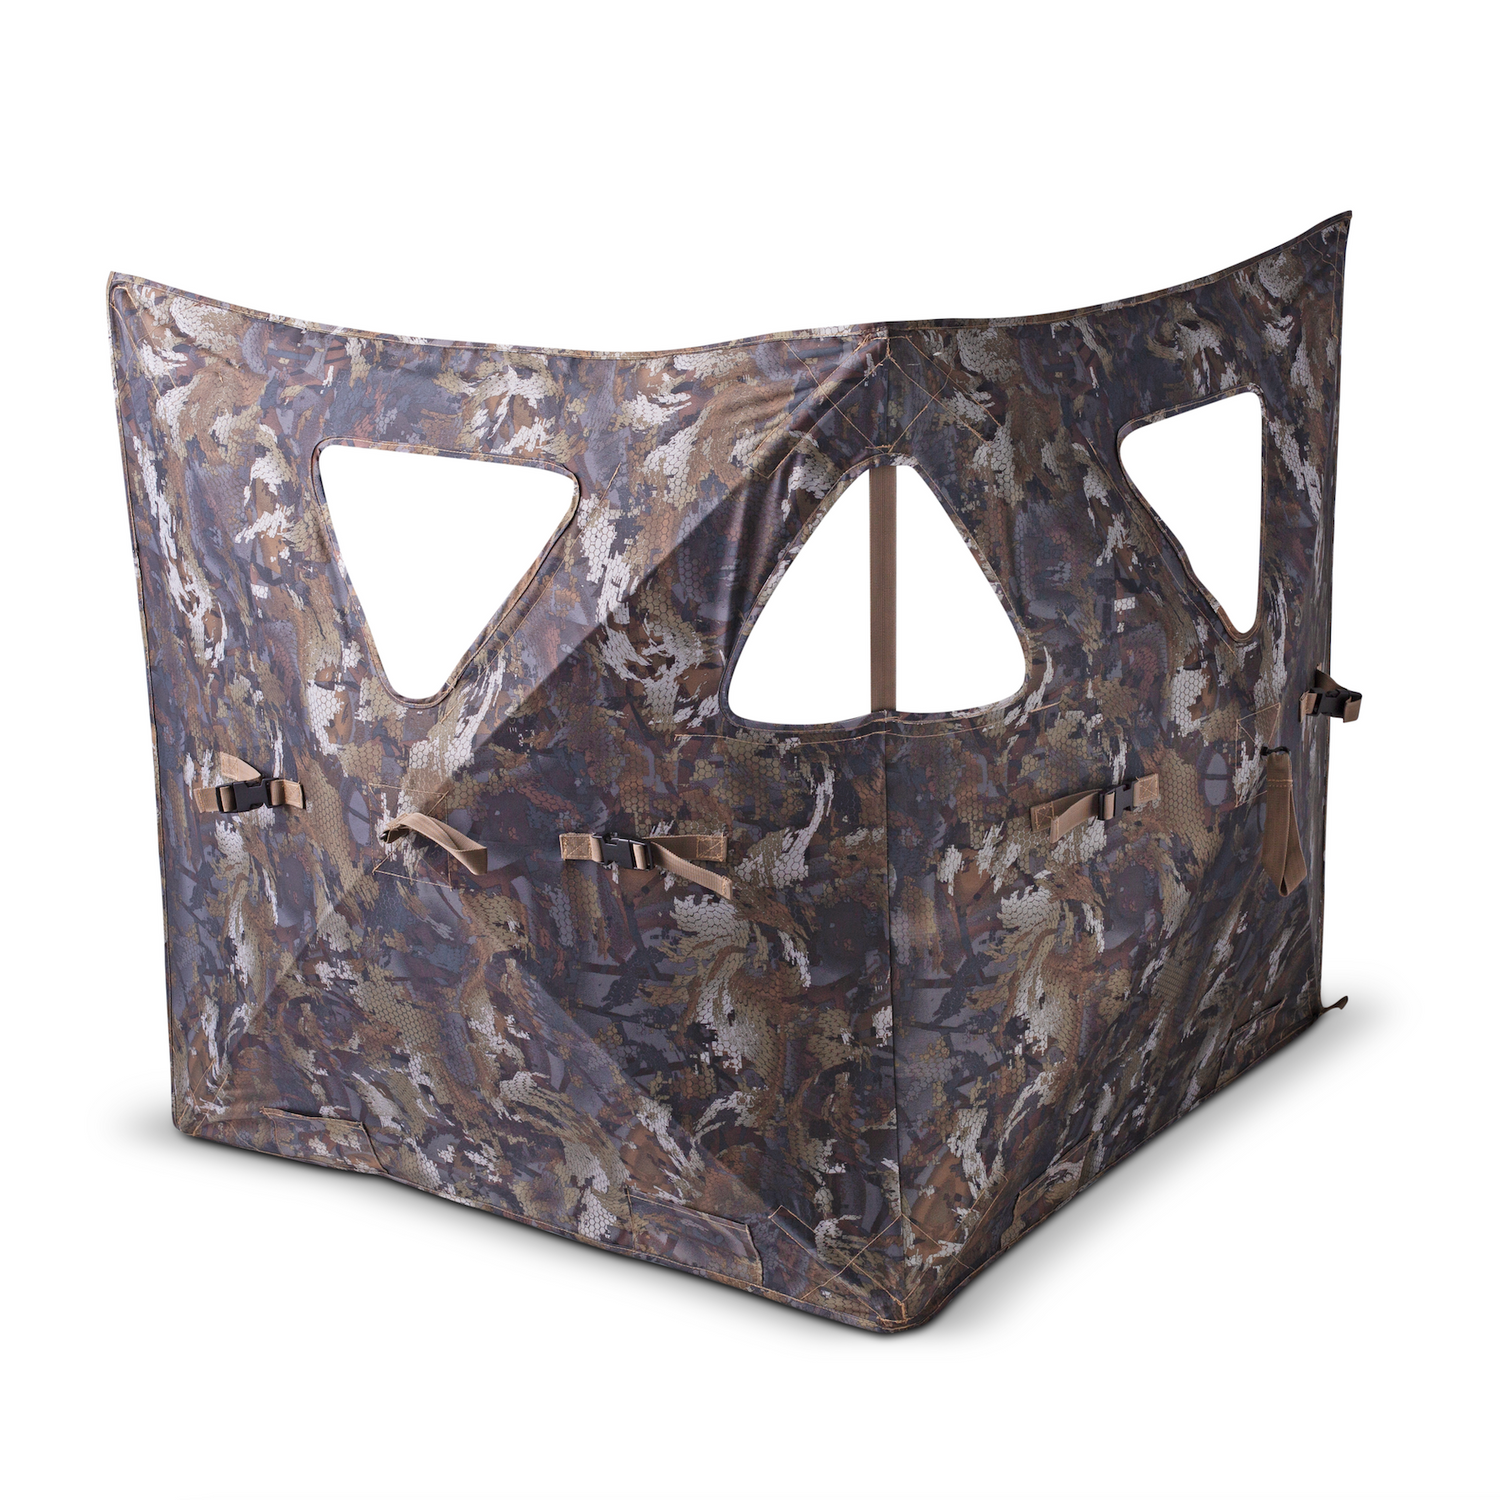 Rig'Em Right HydeOut™ Go in  by GOHUNT | Rig'Em Right - GOHUNT Shop